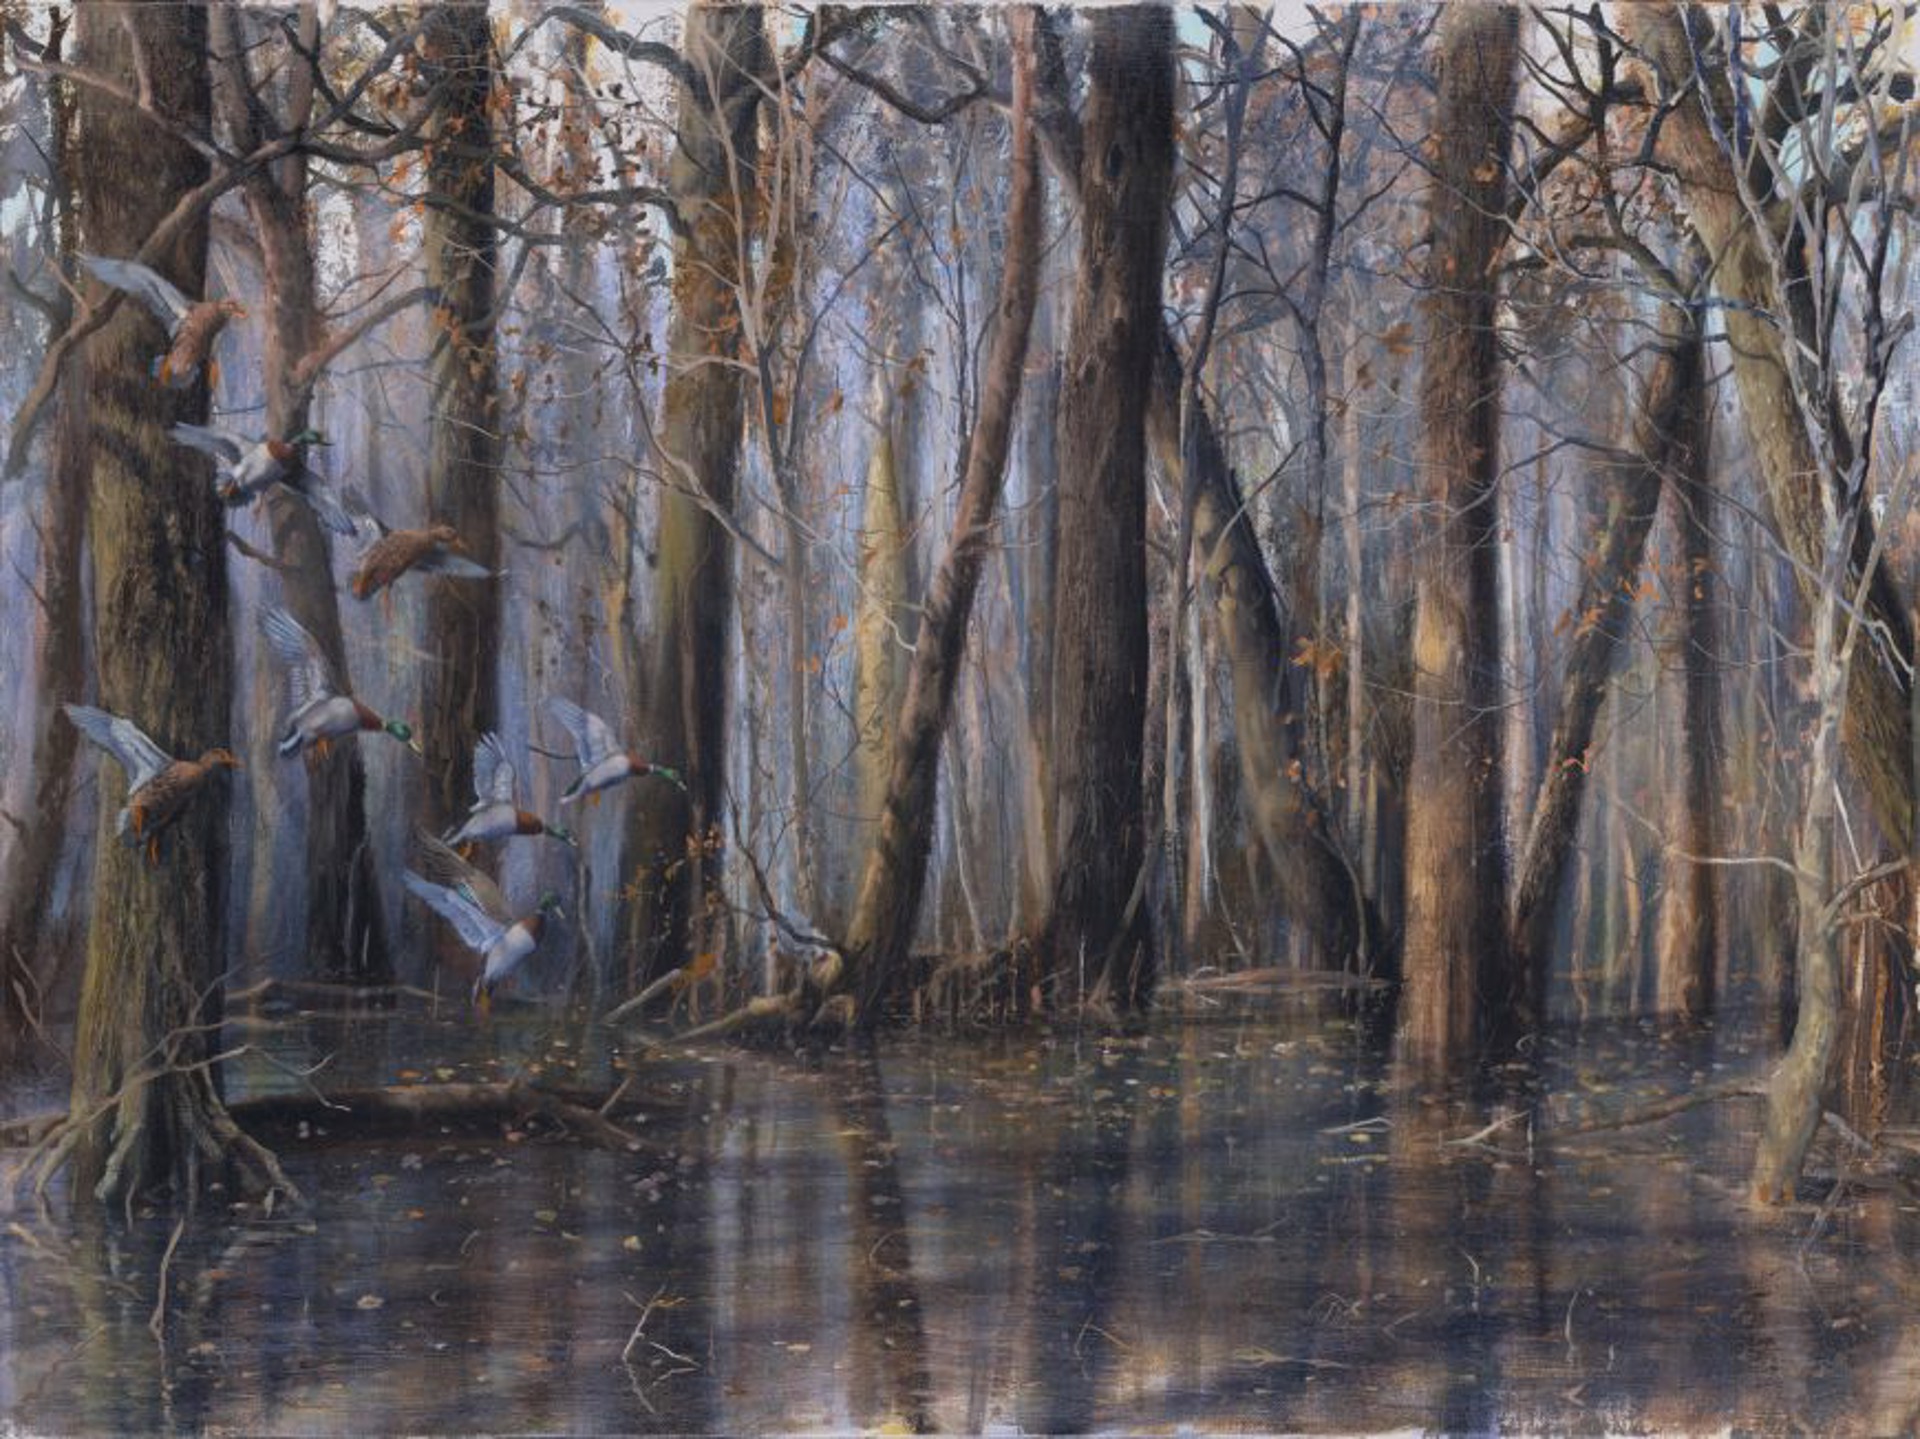 Flooded Timbers I by C. Ford Riley